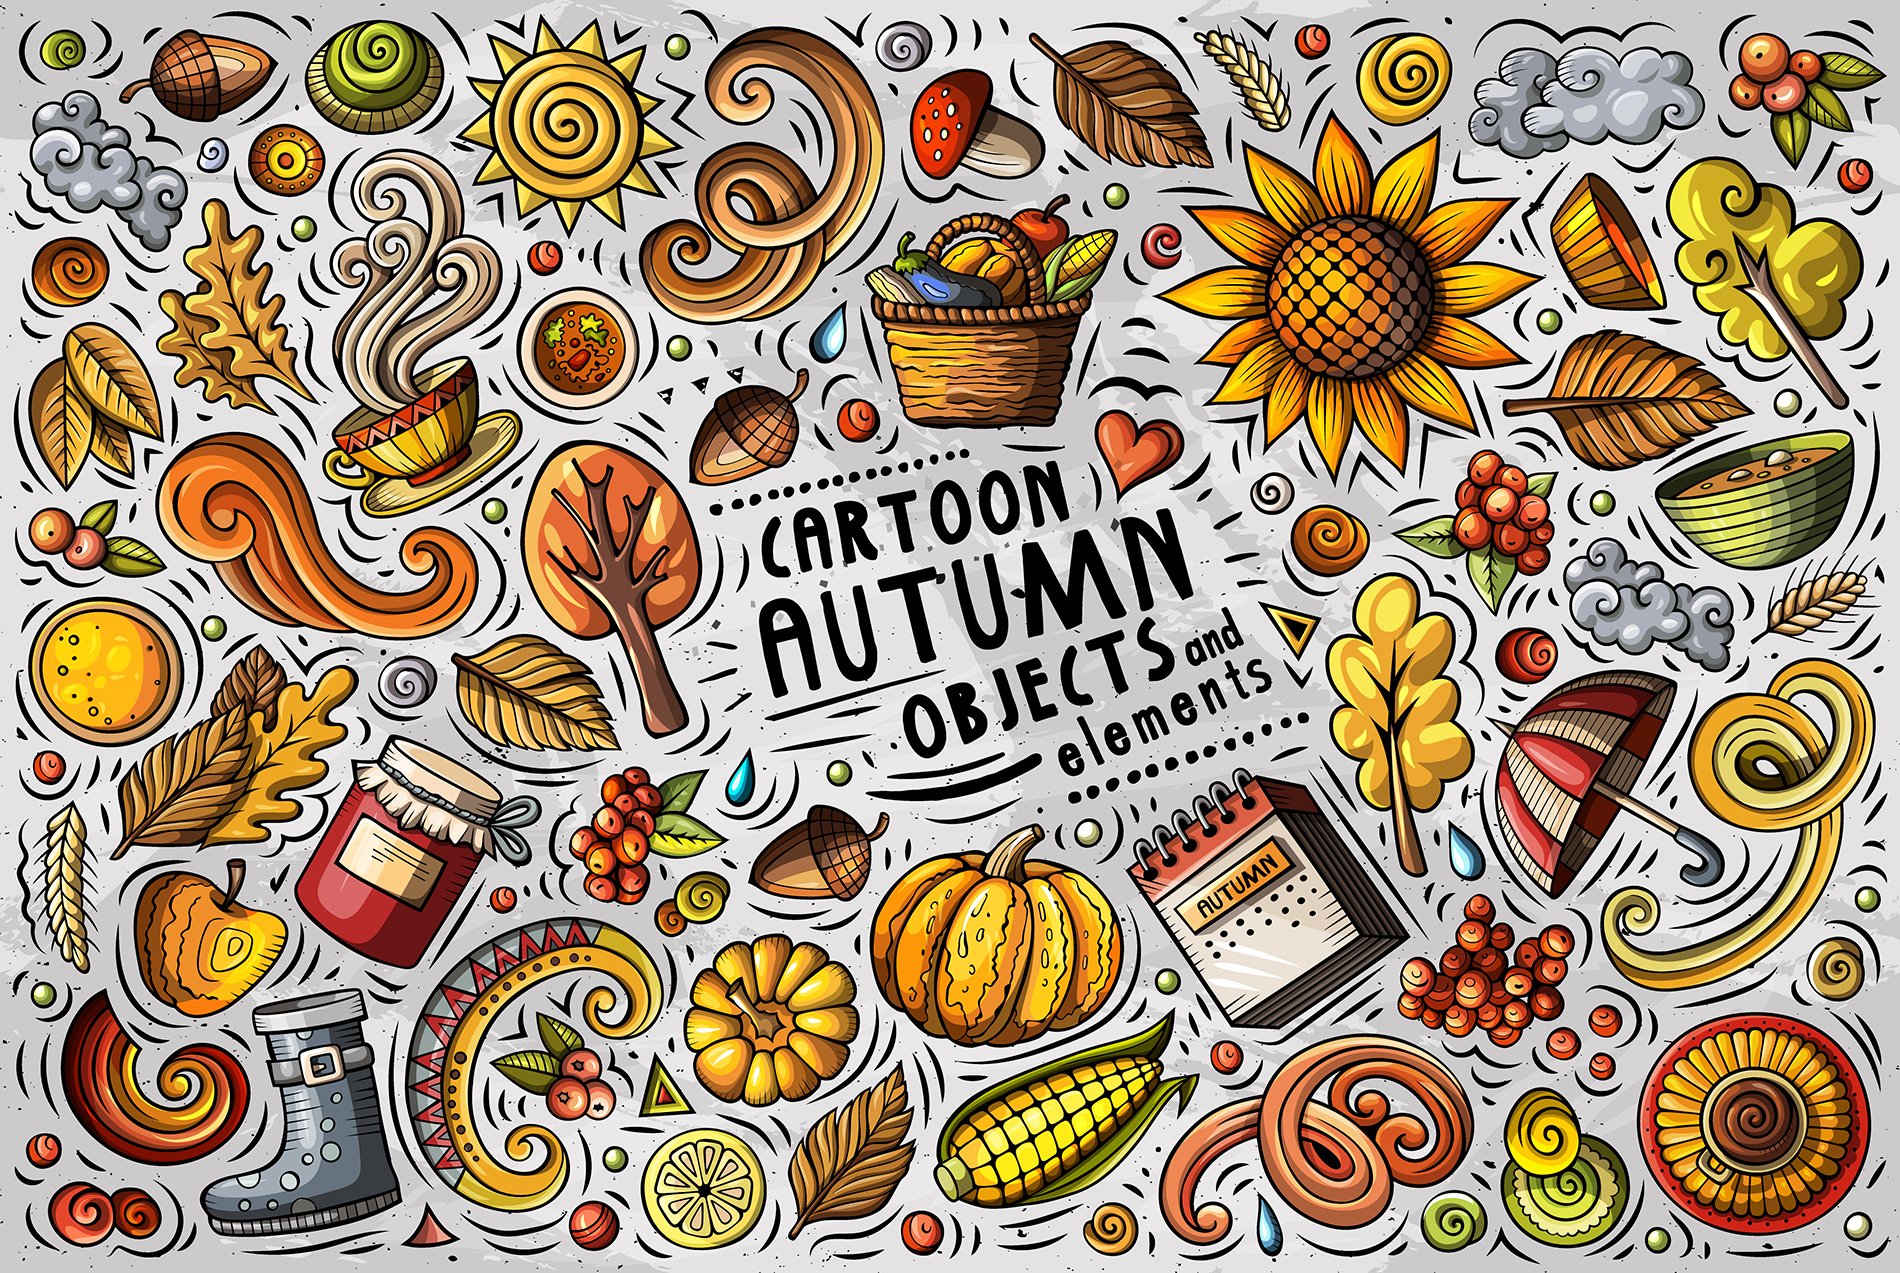 Autumn Cartoon Objects Set cover image.